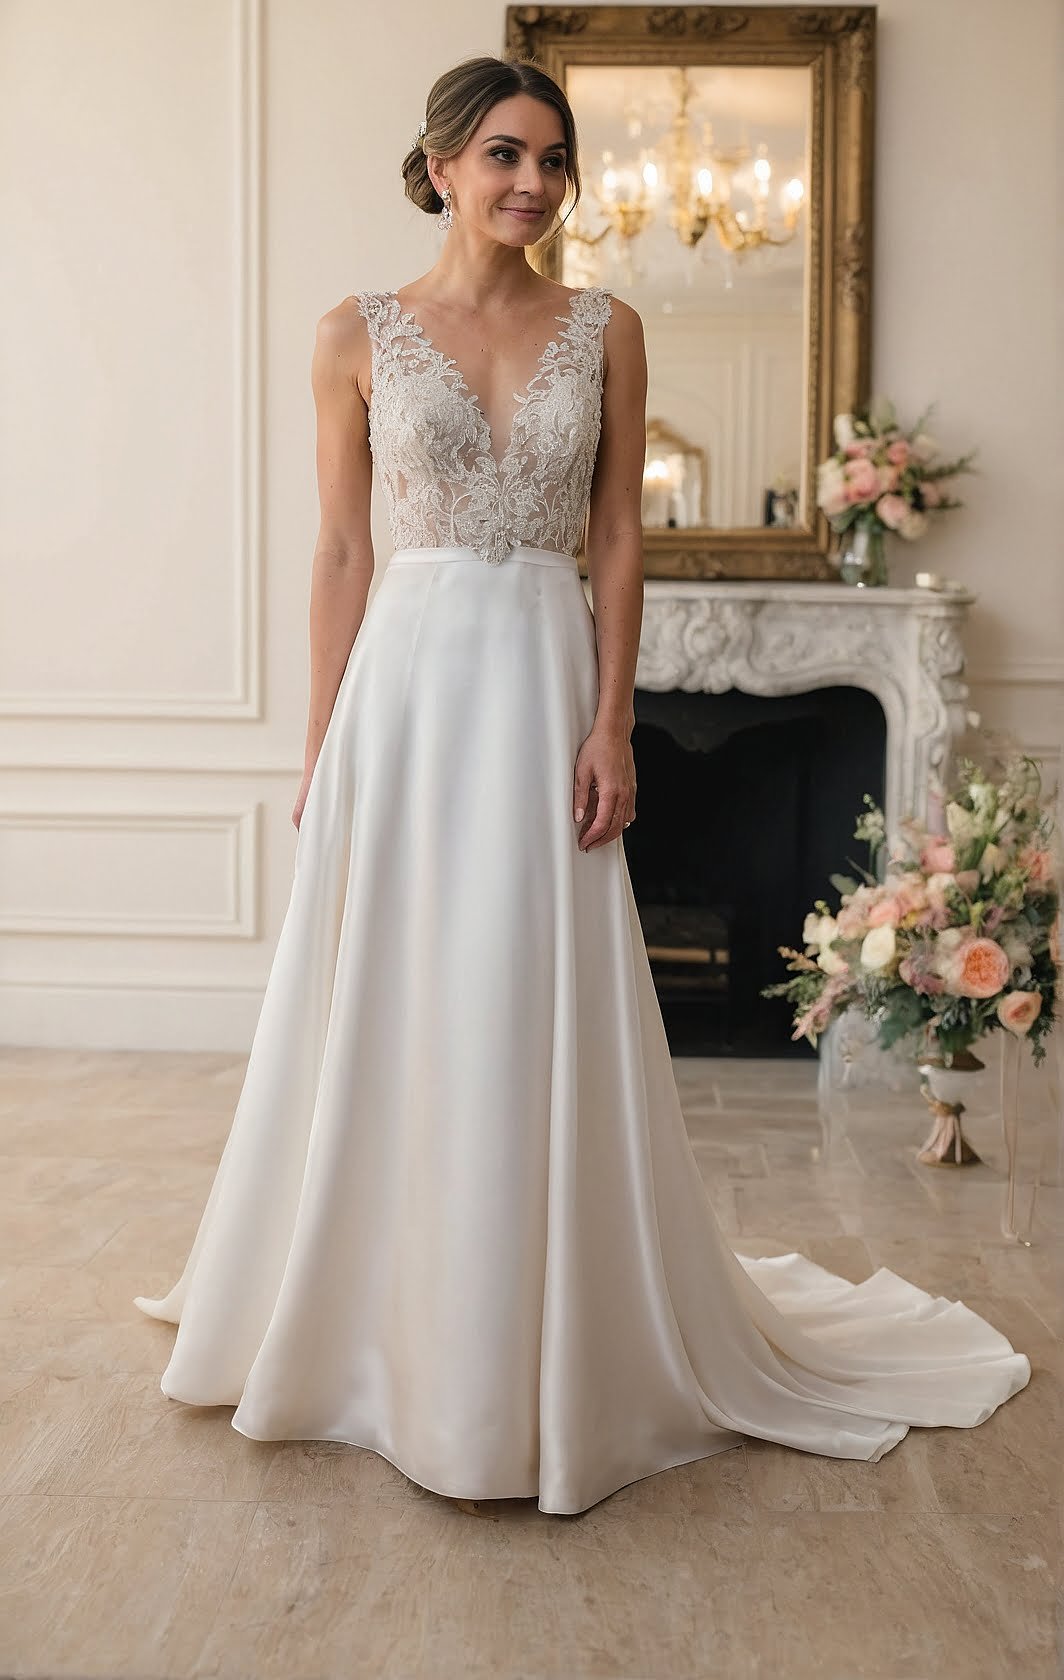 Graceful Lace: Dreamy White Bridal Gown with Sheer Back